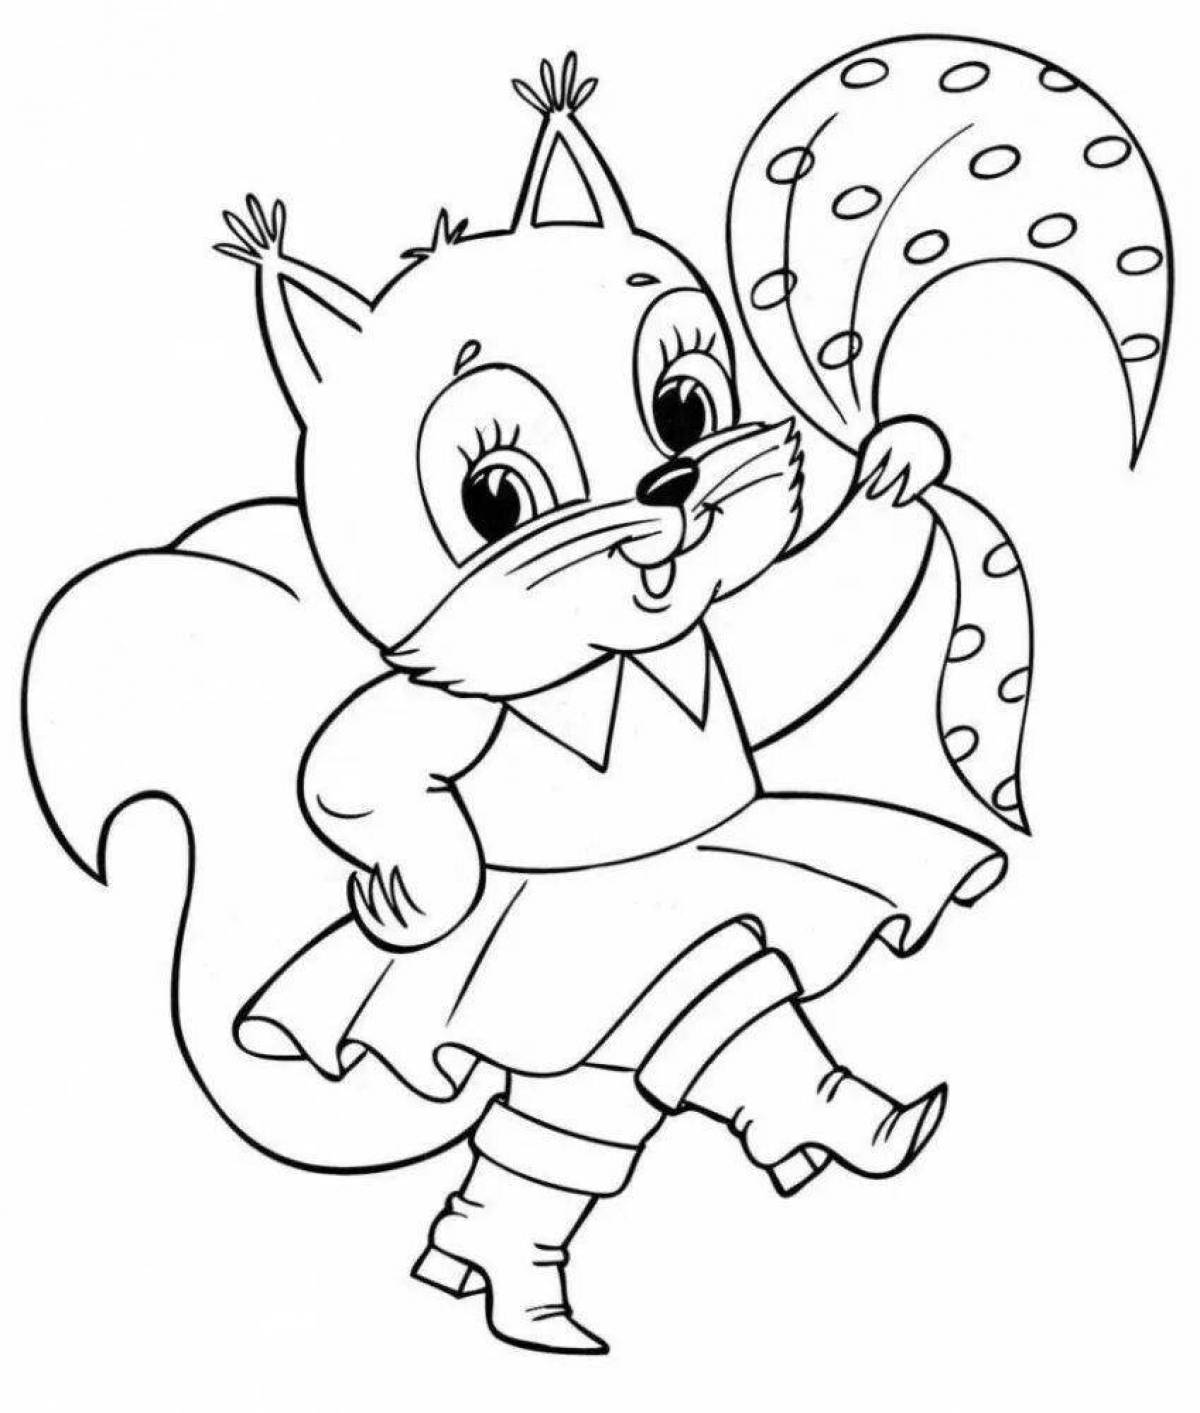 Funny squirrel coloring book for children 3-4 years old